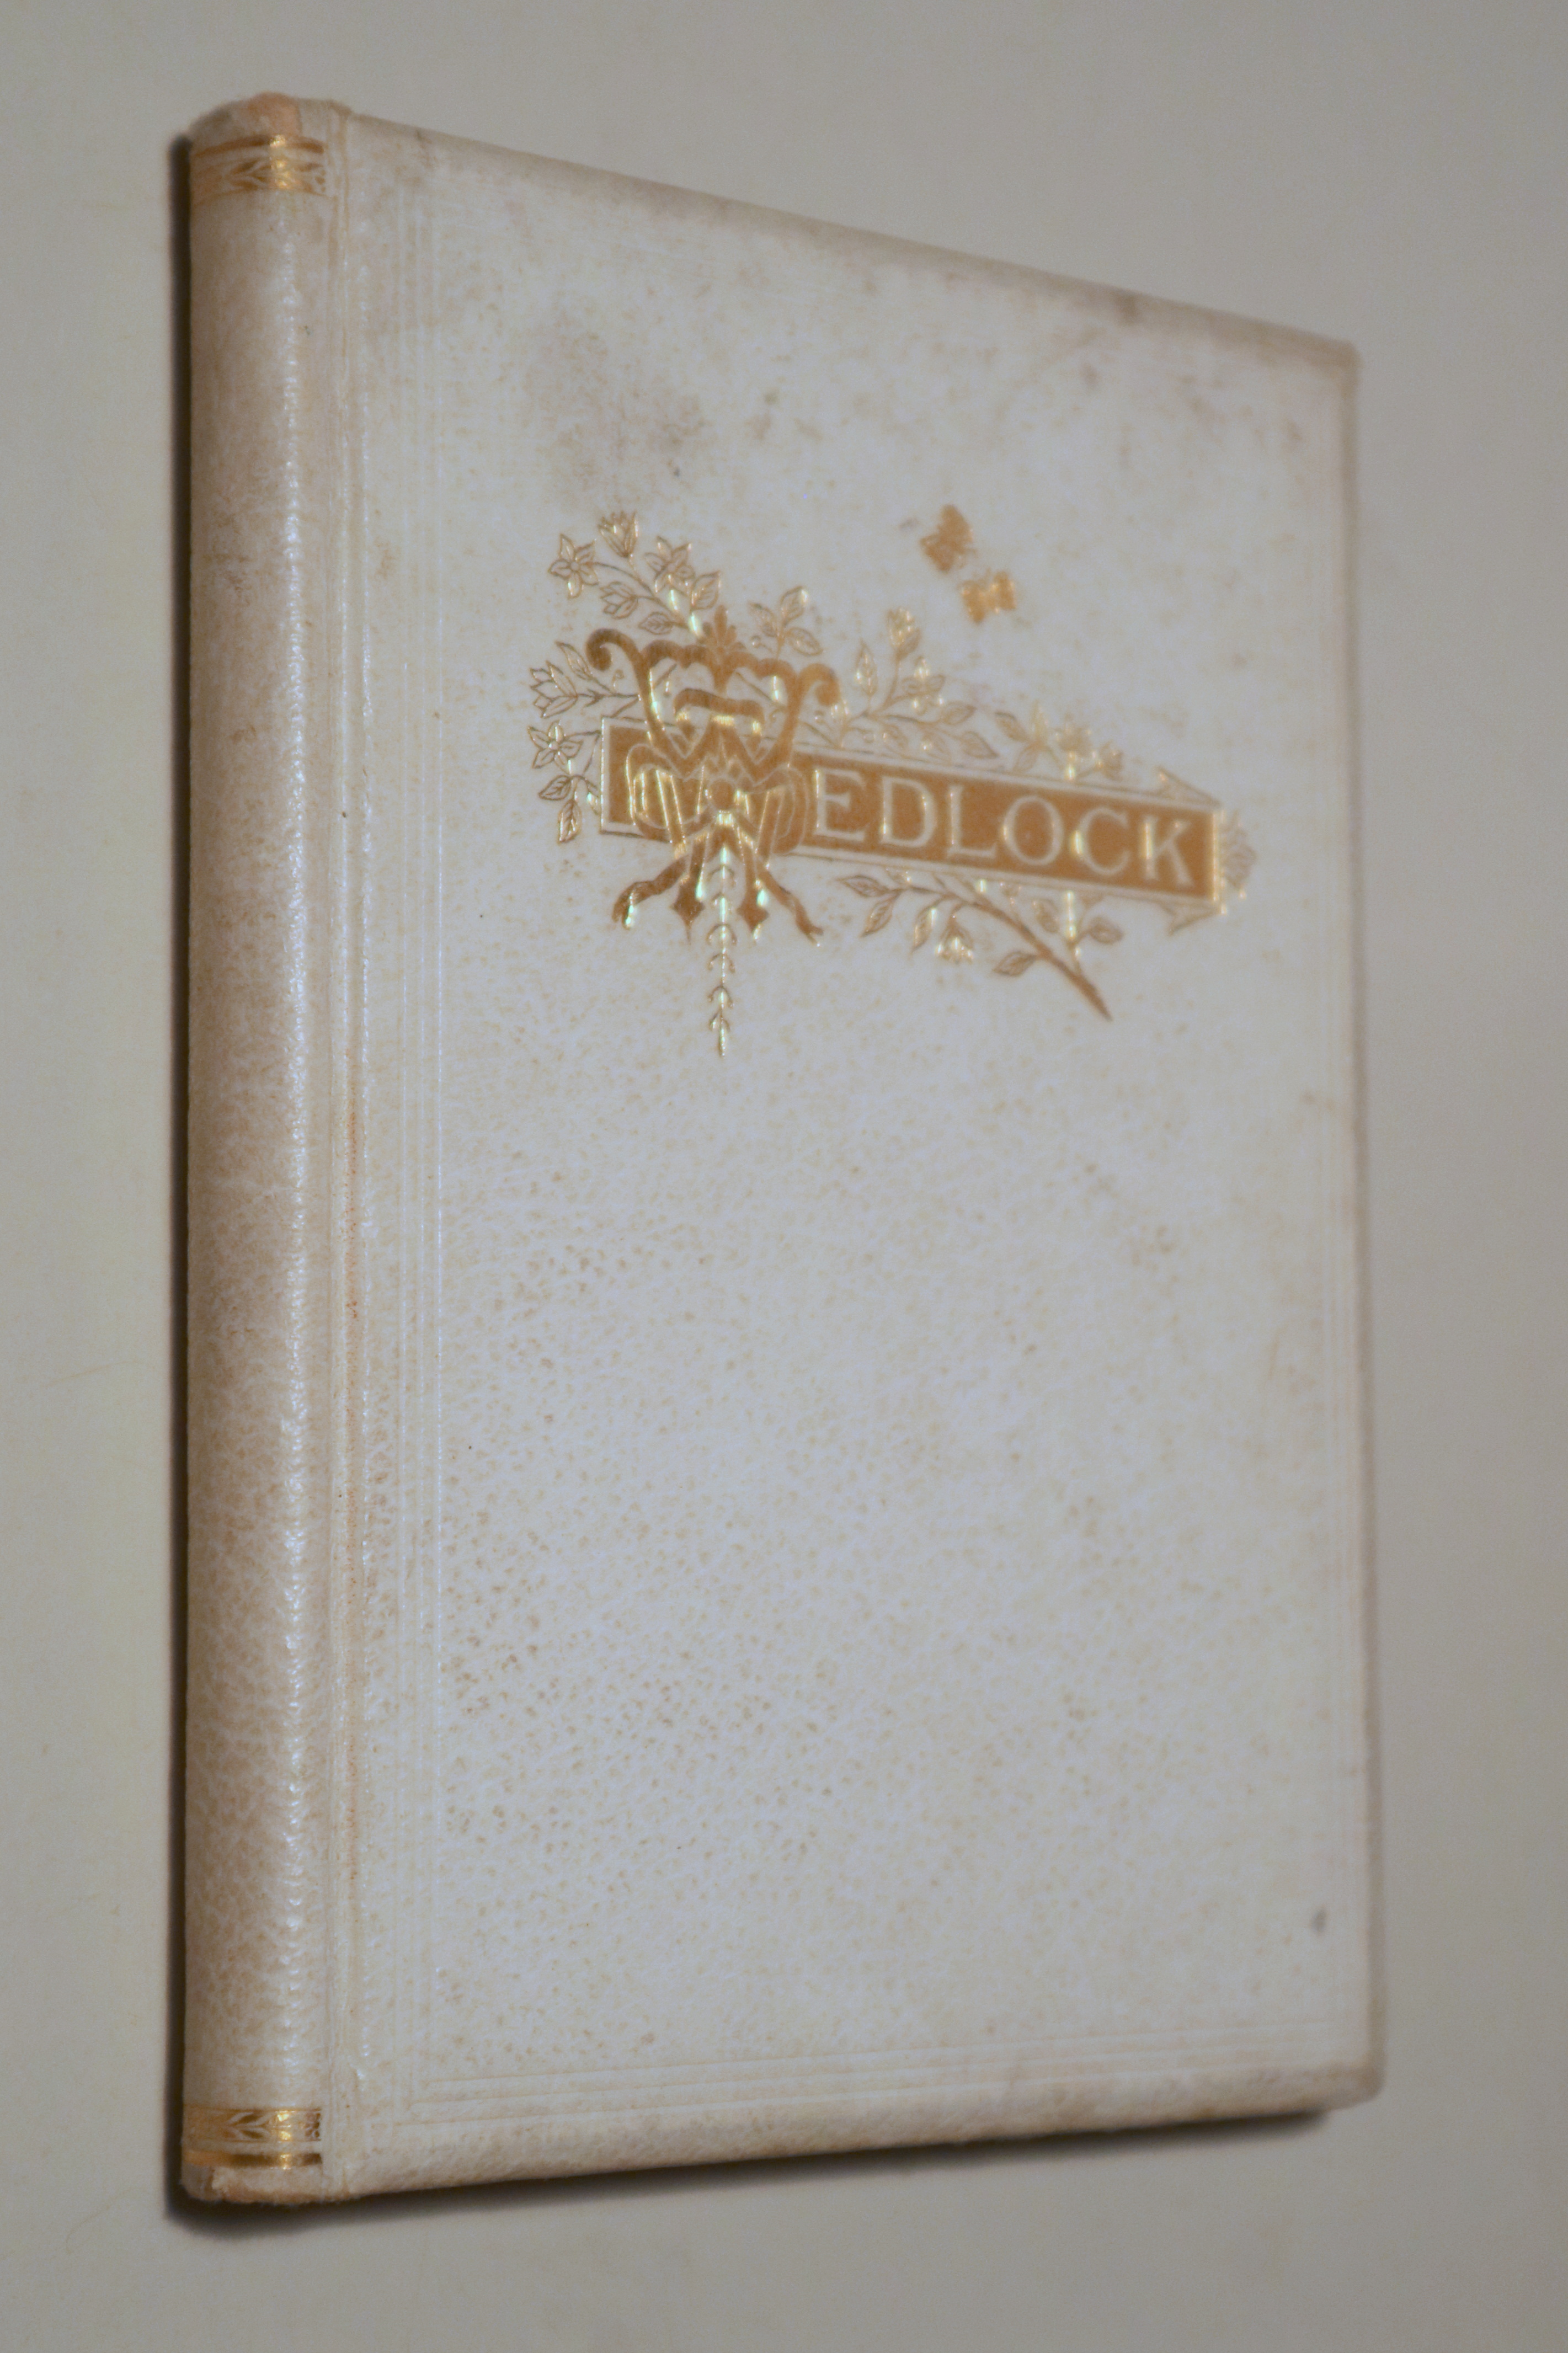 WEDLOCK: SELECTIONS FROM THE BEST ENGLISH AND AMERICAN POETS - New York 1881